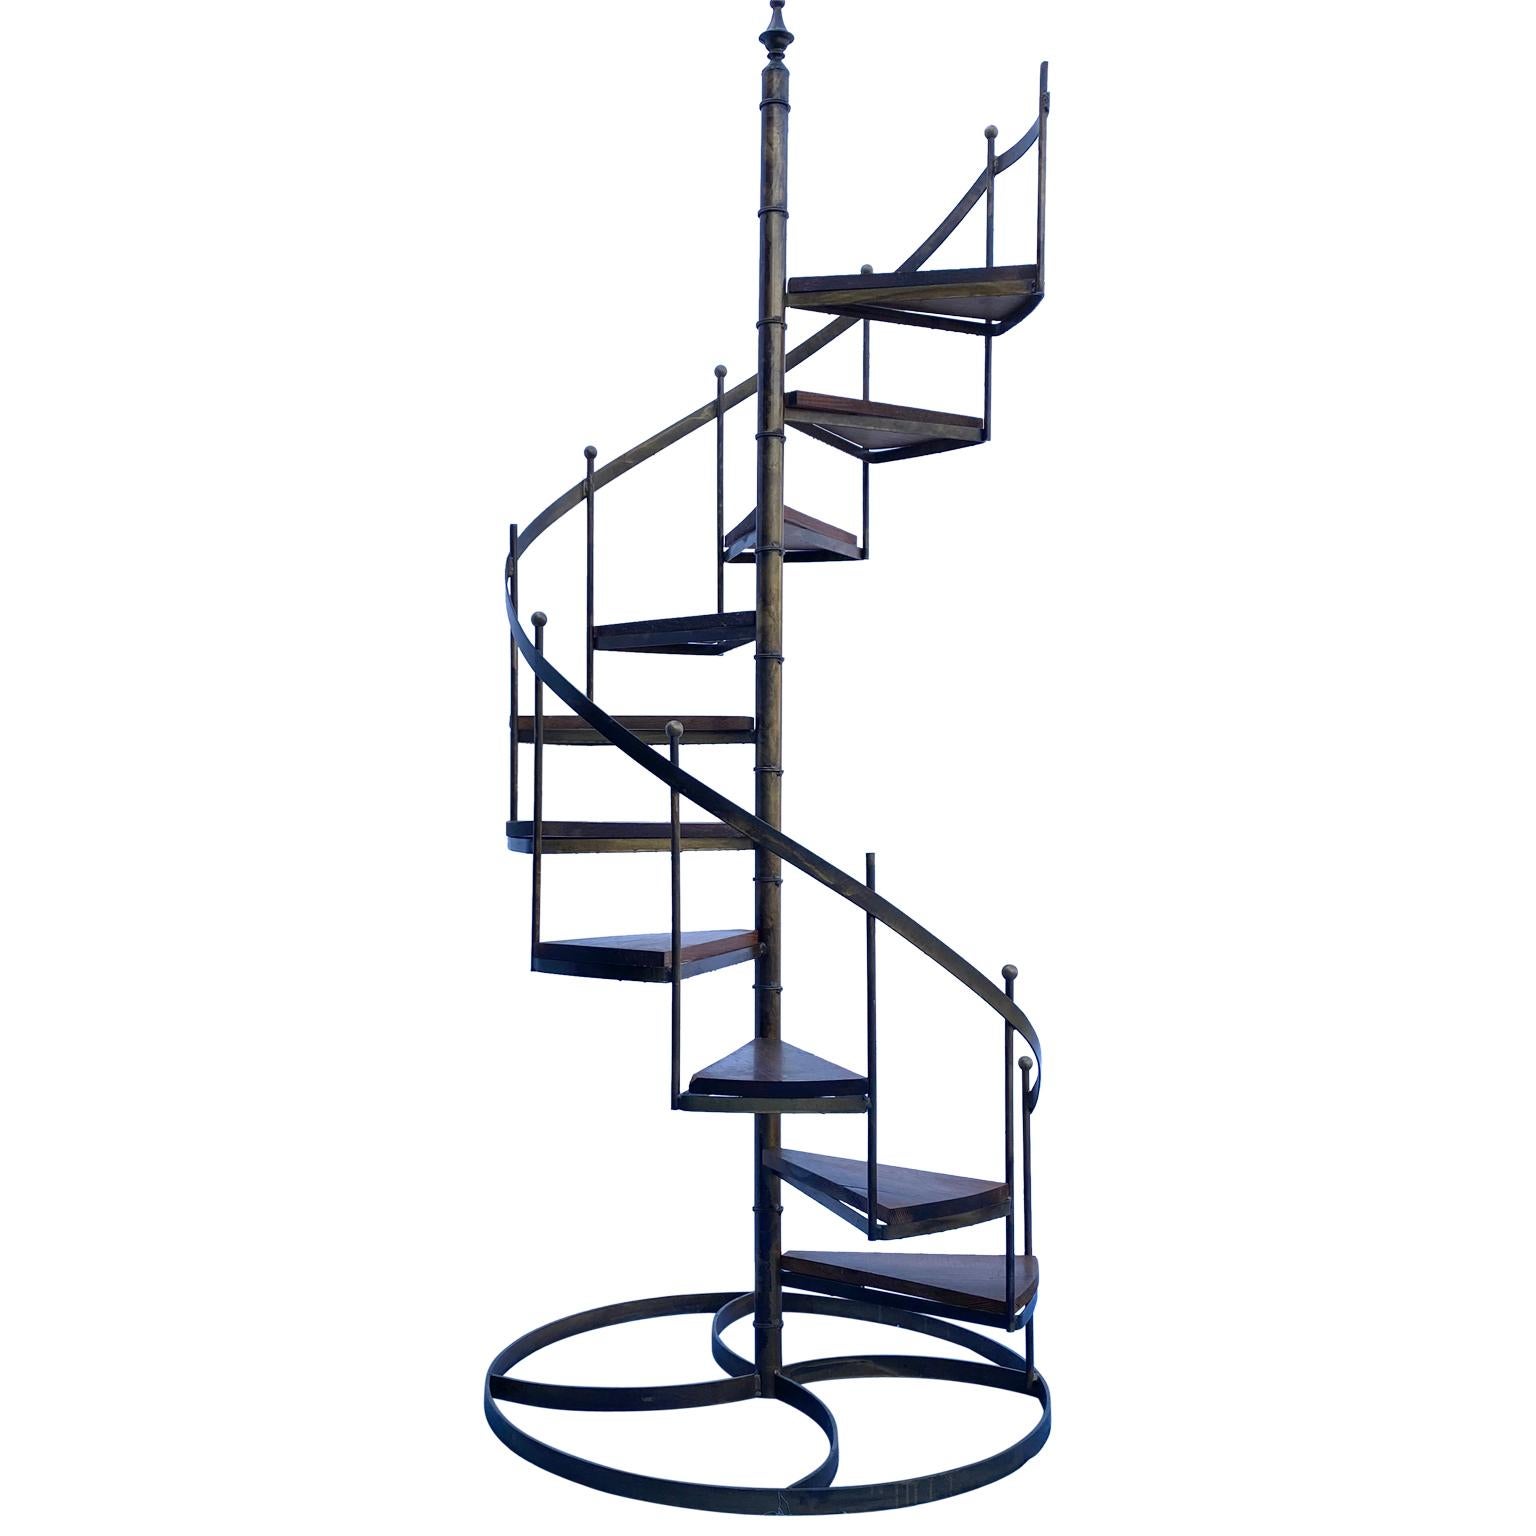 Circular wrought iron display staircase with 10 wood shelves.

A circular bronzed wrought iron display staircase from the 1960s.